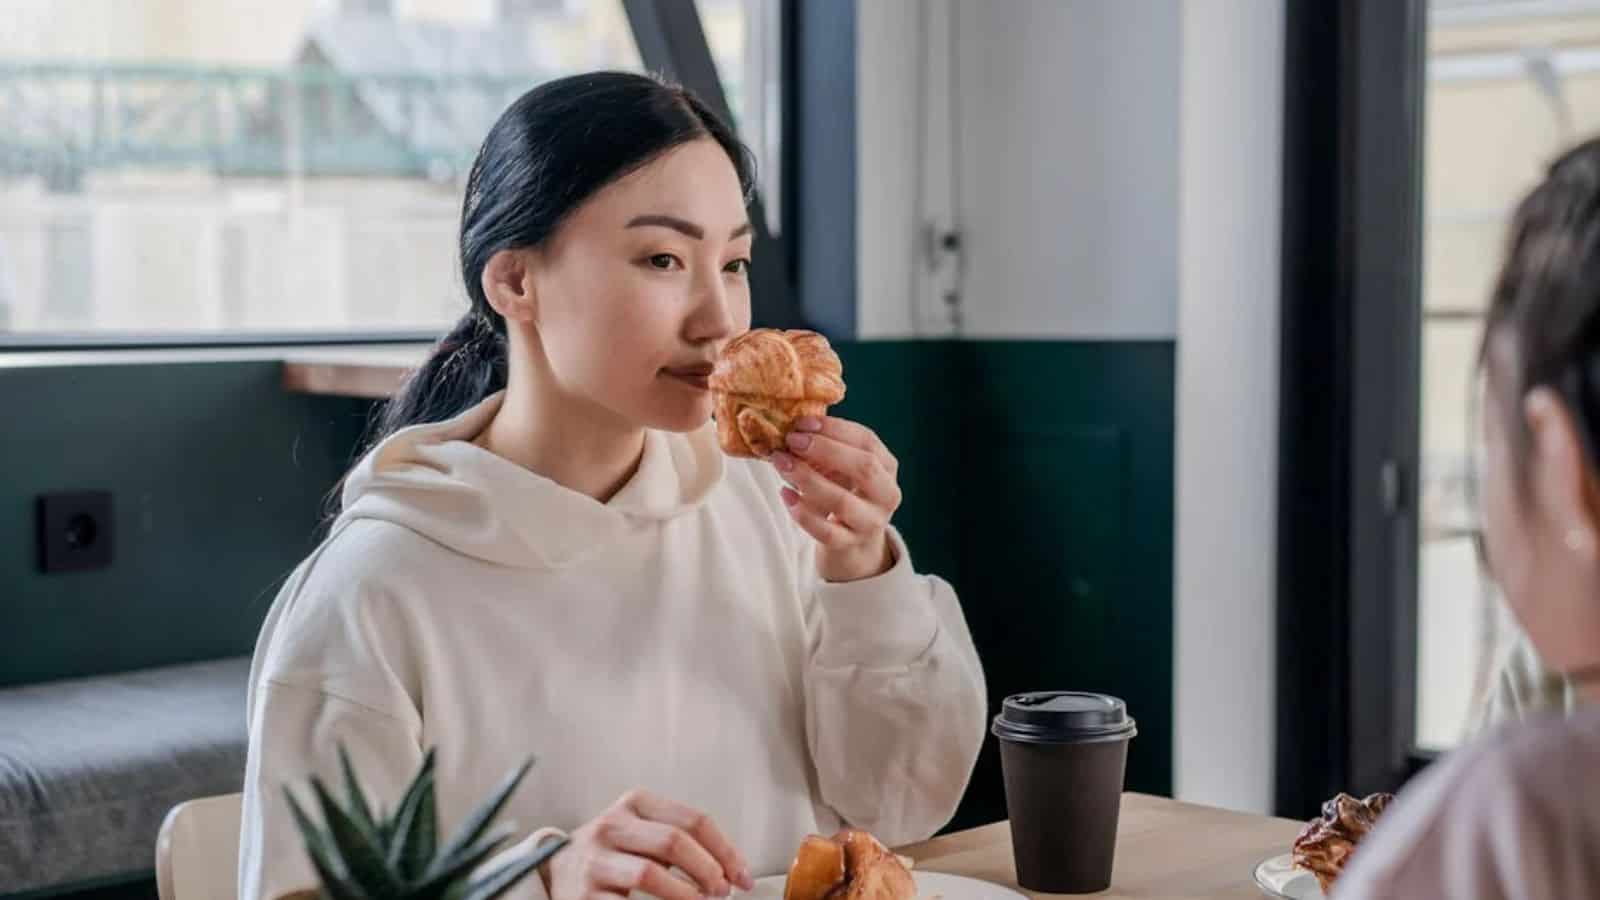 A Woman Smelling a Muffin.